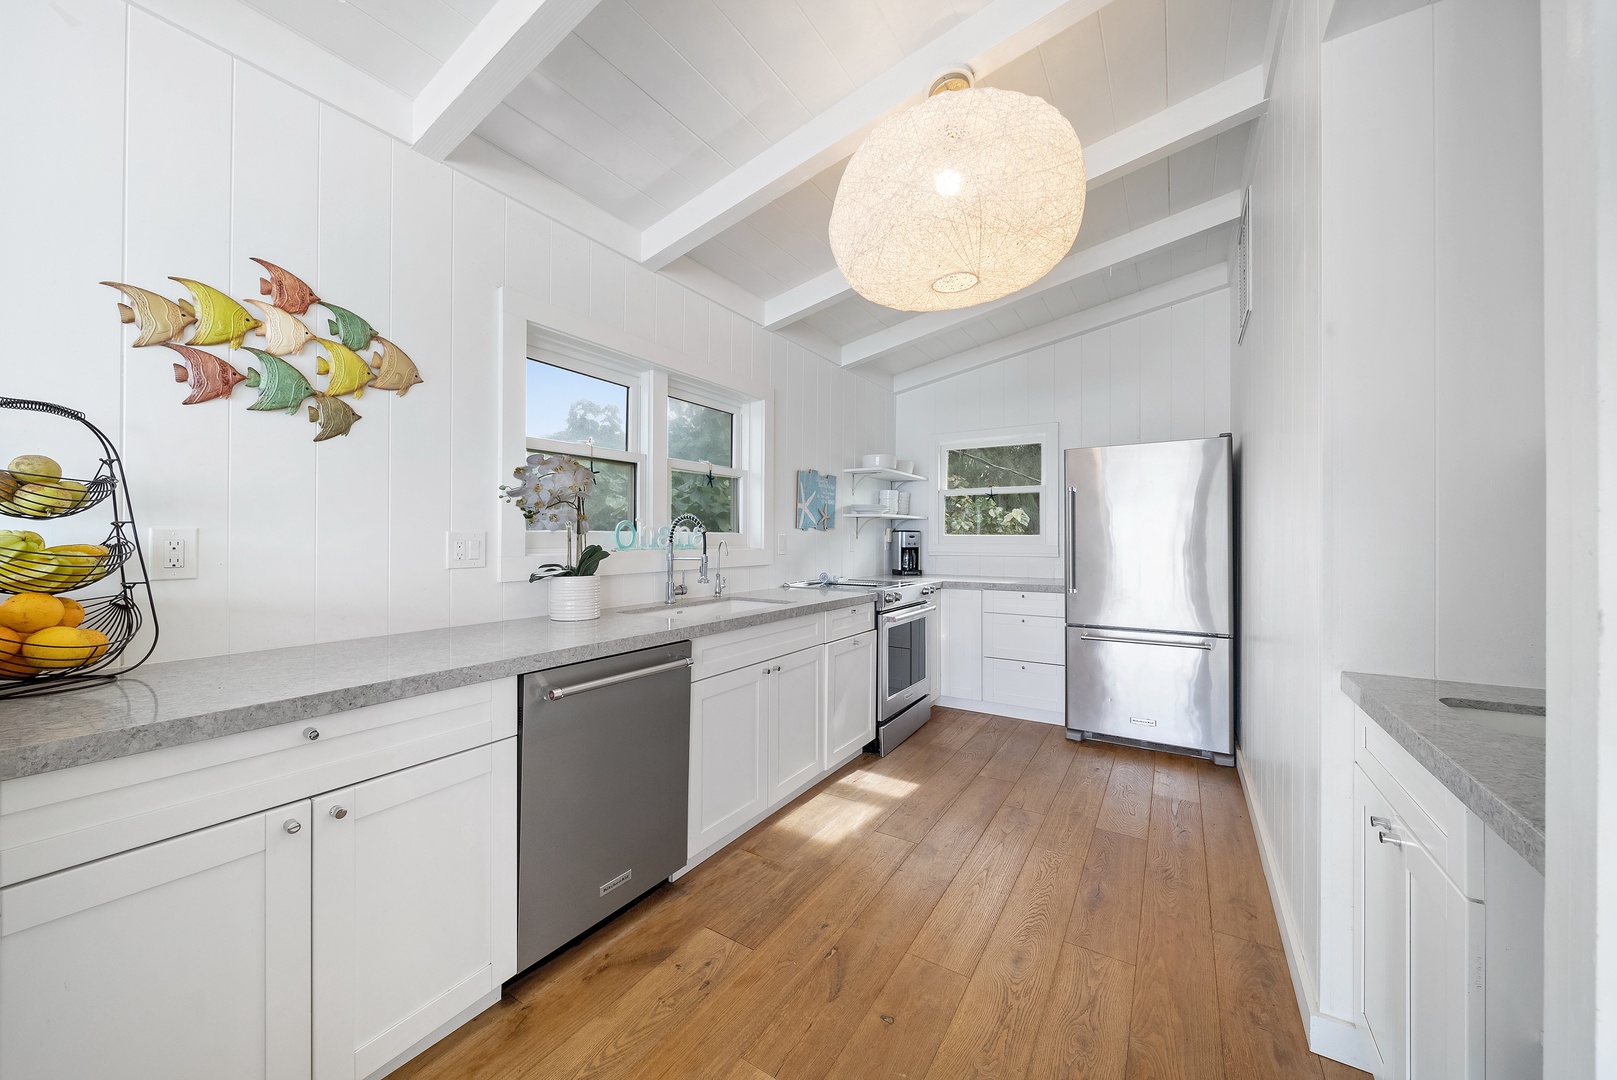 Haleiwa Vacation Rentals, Surfer's Paradise - Fully equipped kitchen with stainless steel appliances